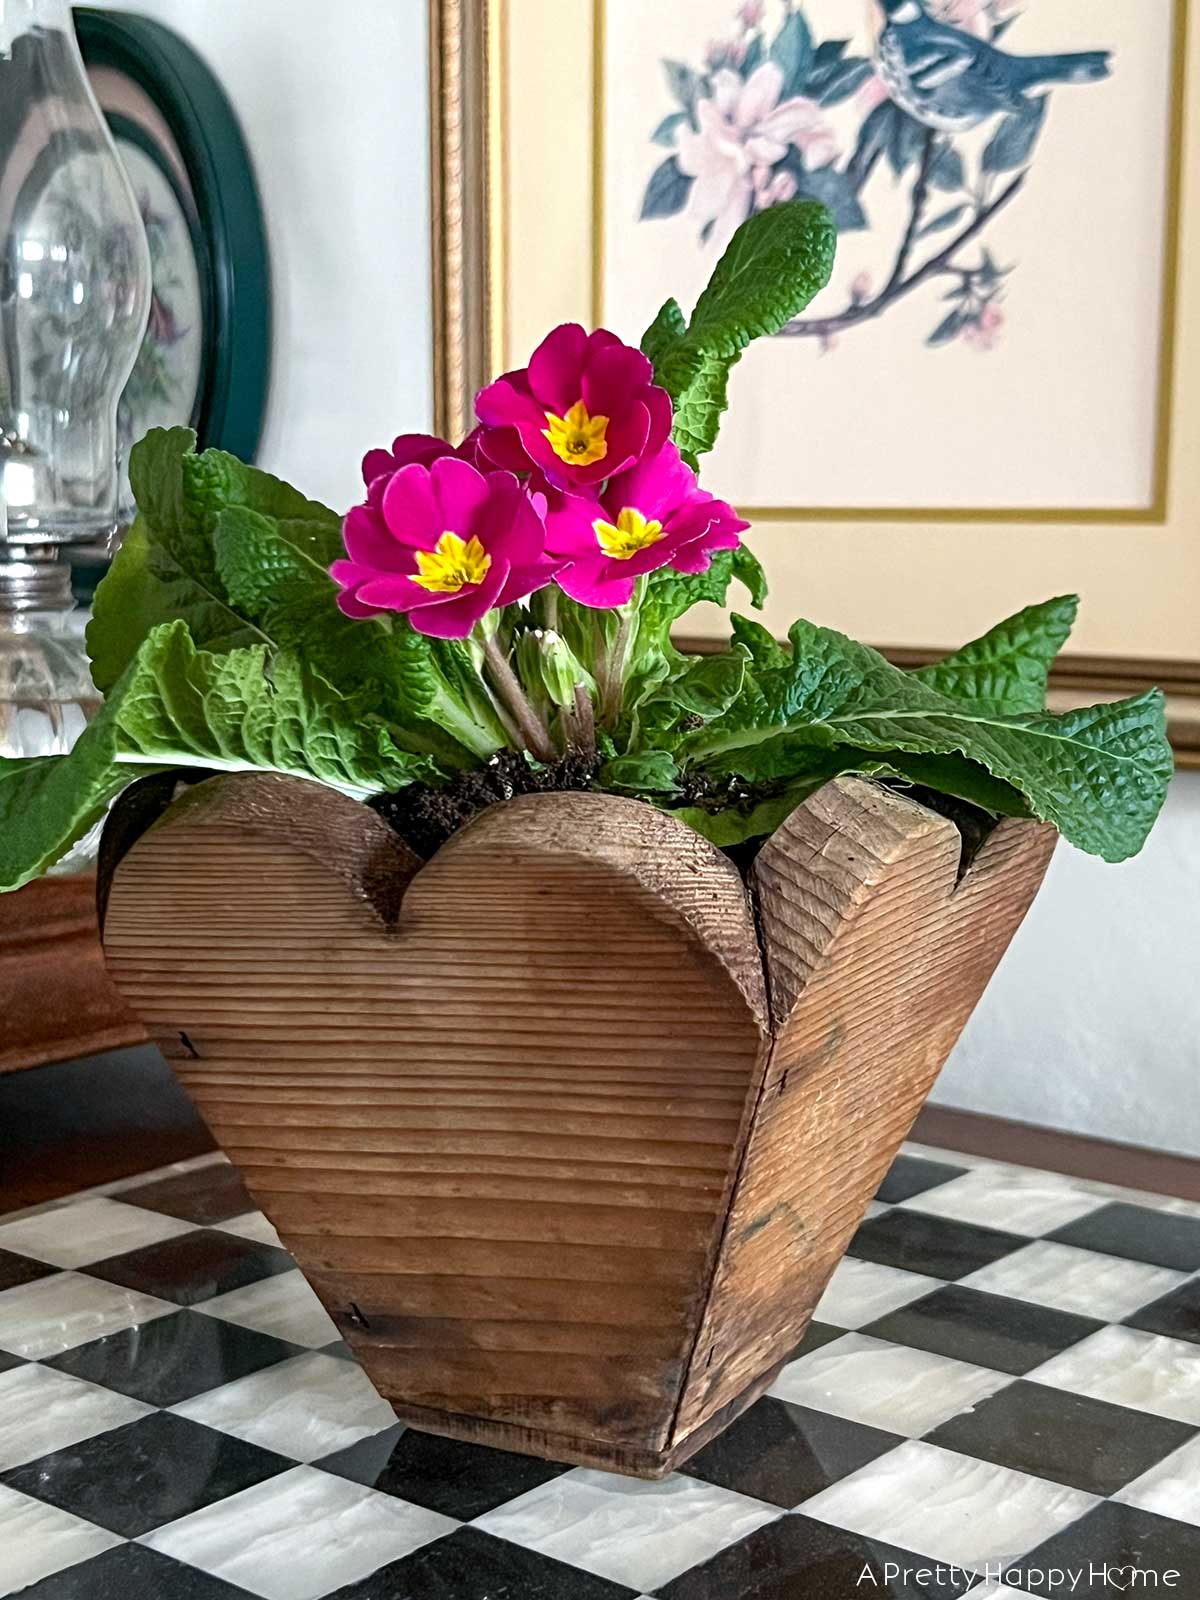 How To Make Wood Heart Planters DIY rustic wood heart planters